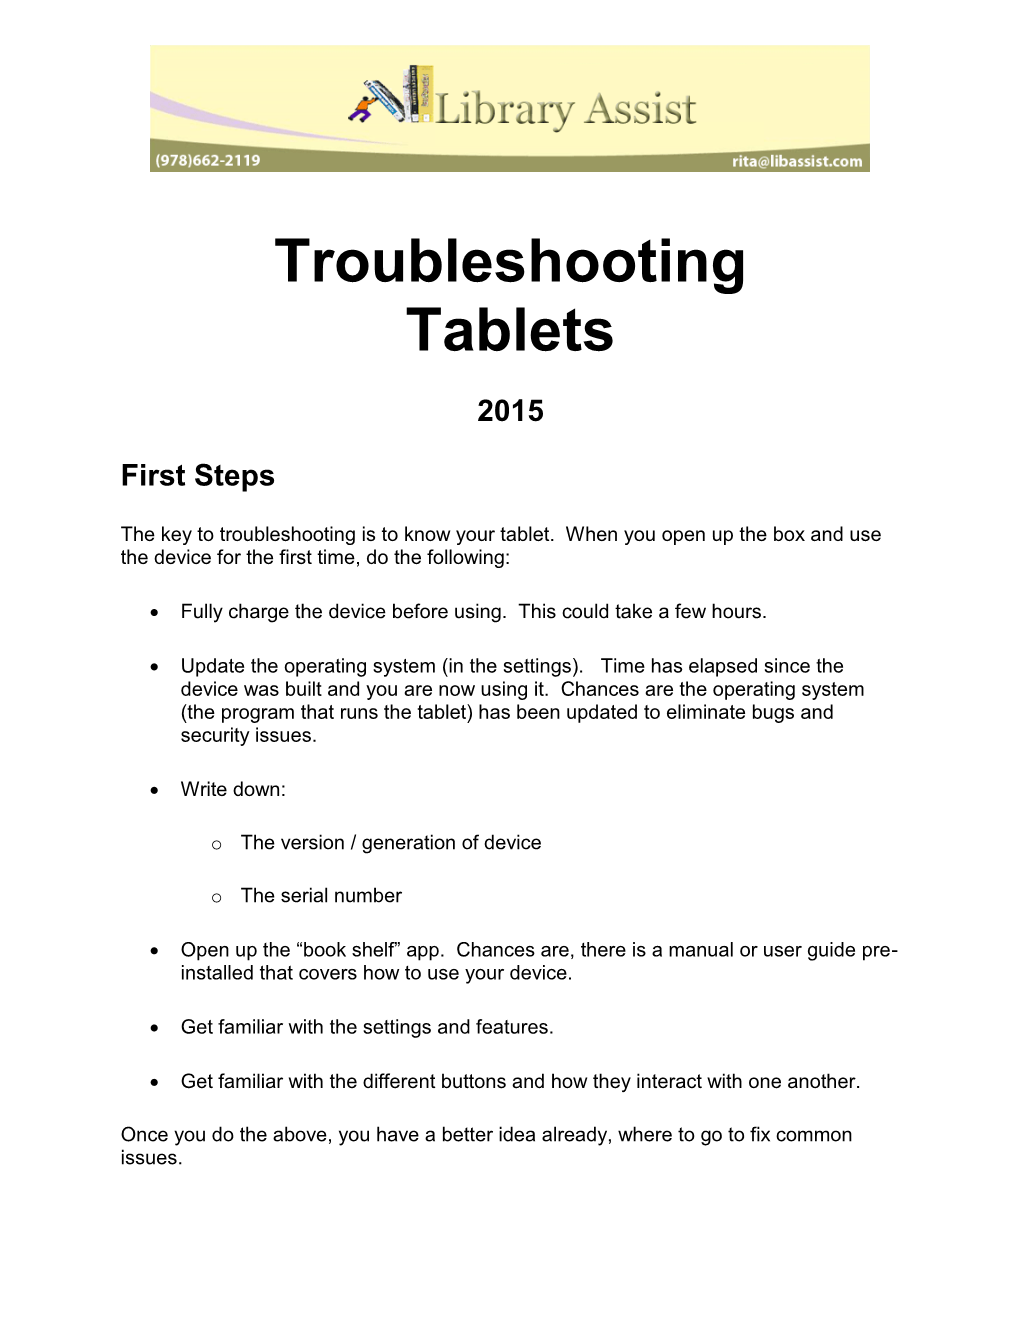 Troubleshooting Tablets